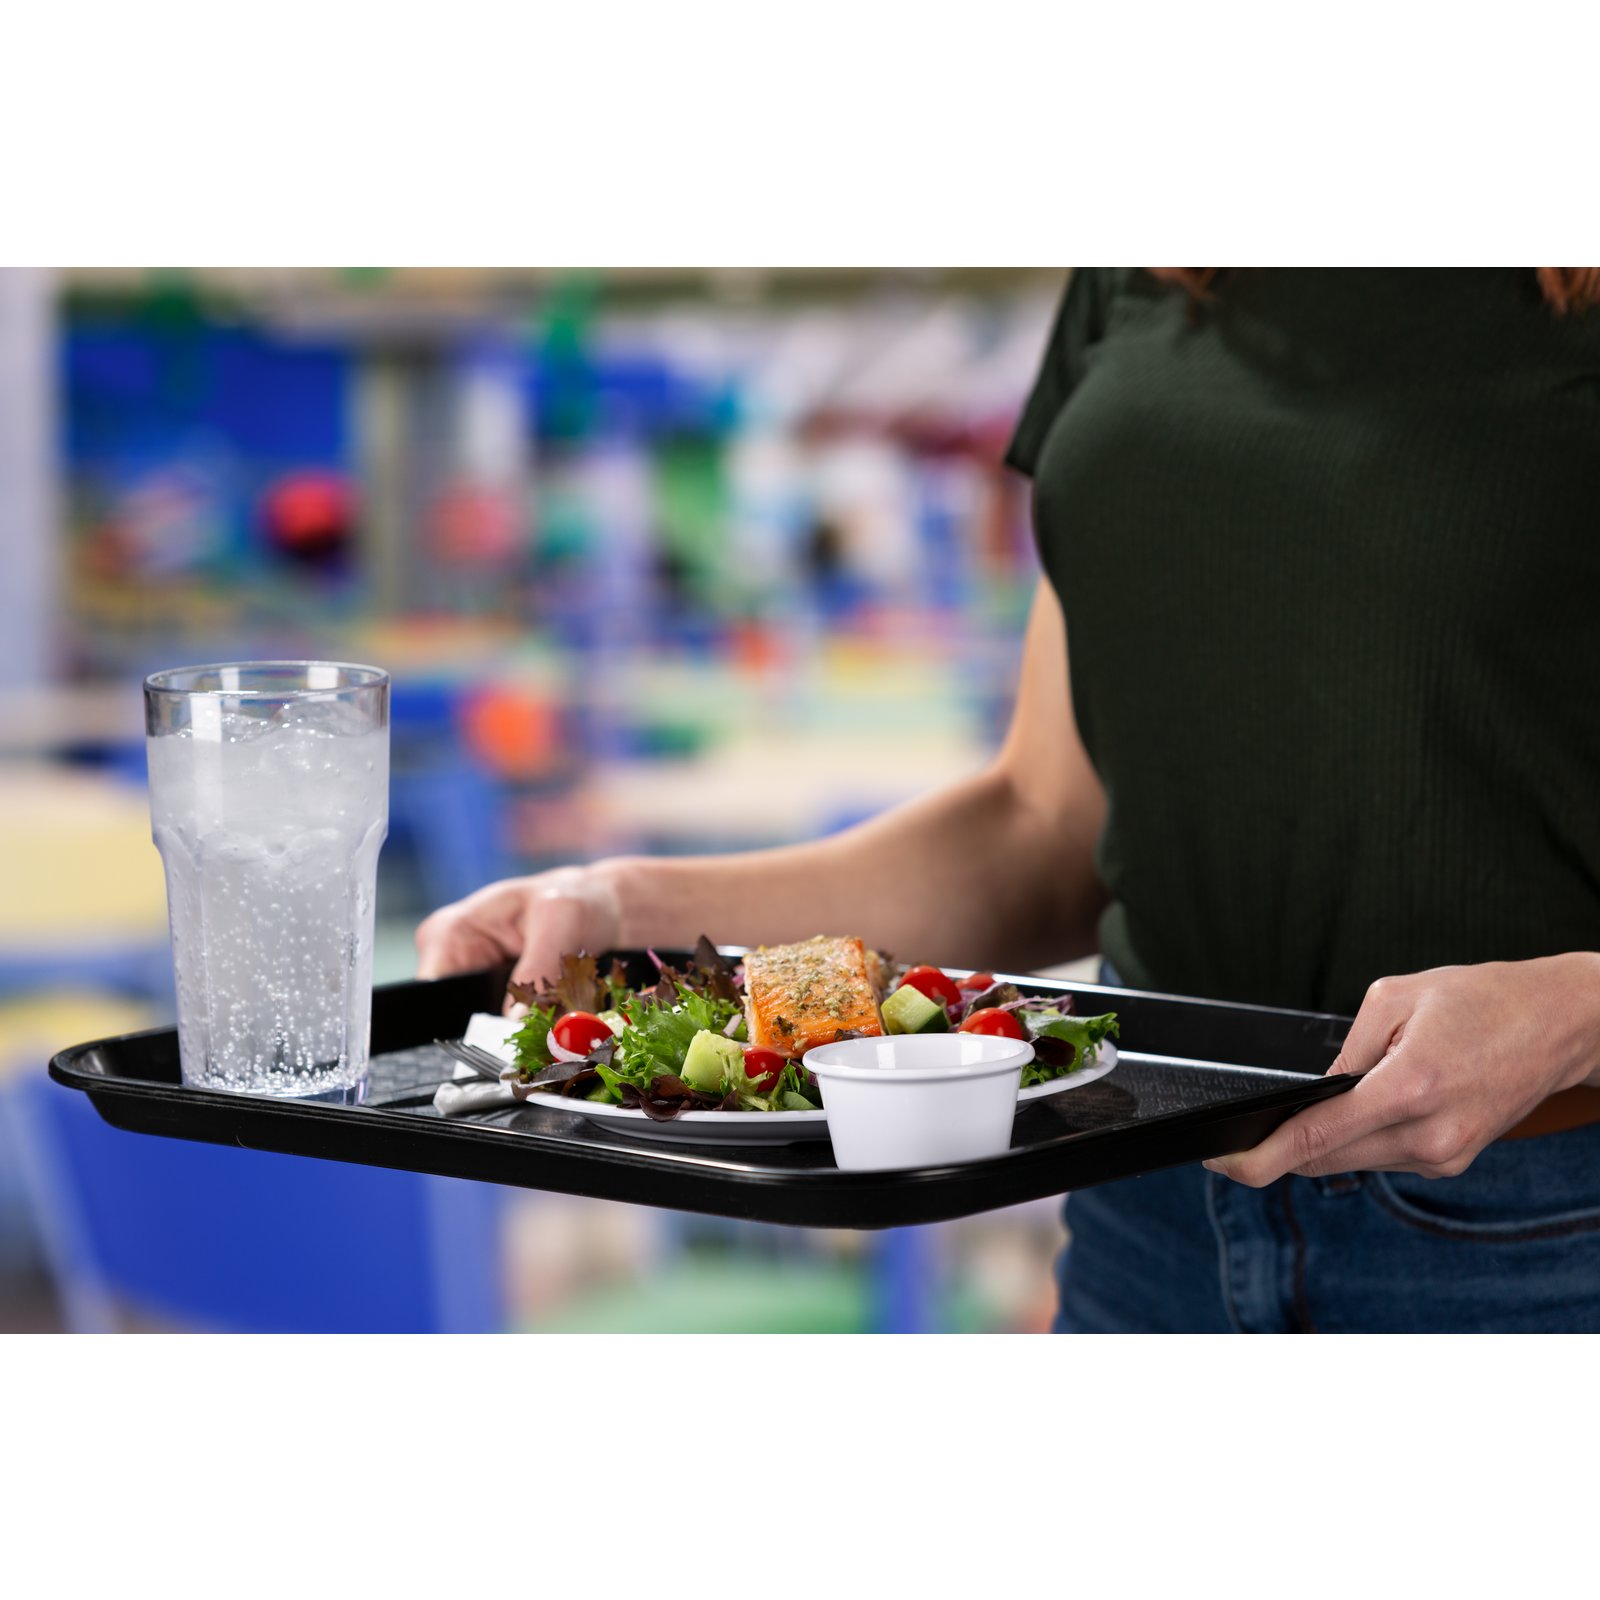 Carlisle 14 in. x 18 in. Polypropylene Tray in Black (Case of 12) CT141803  - The Home Depot